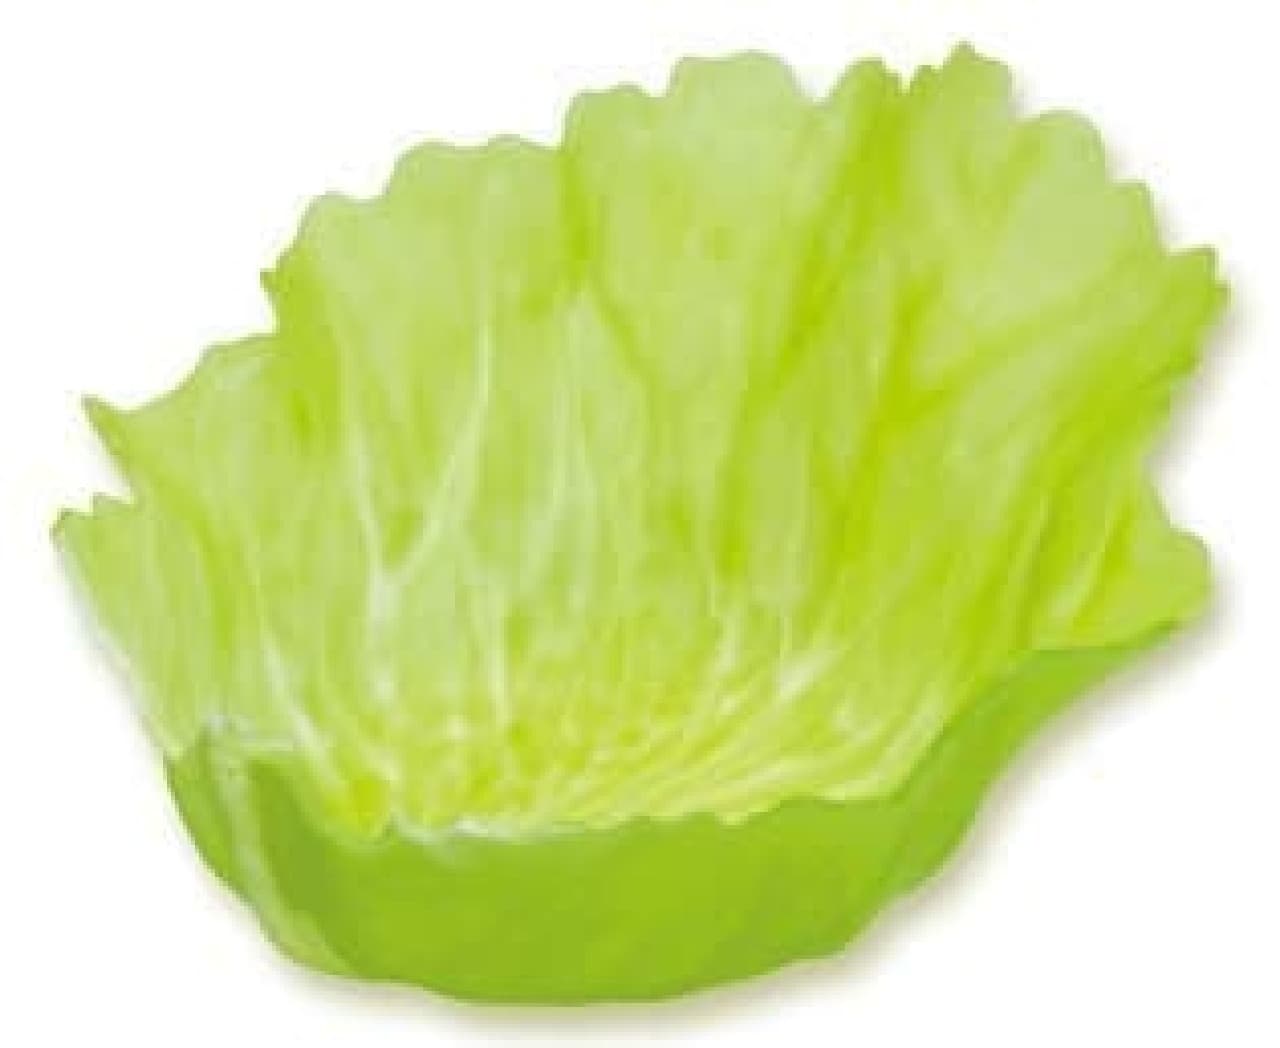 Lettuce no matter how you look at it ...